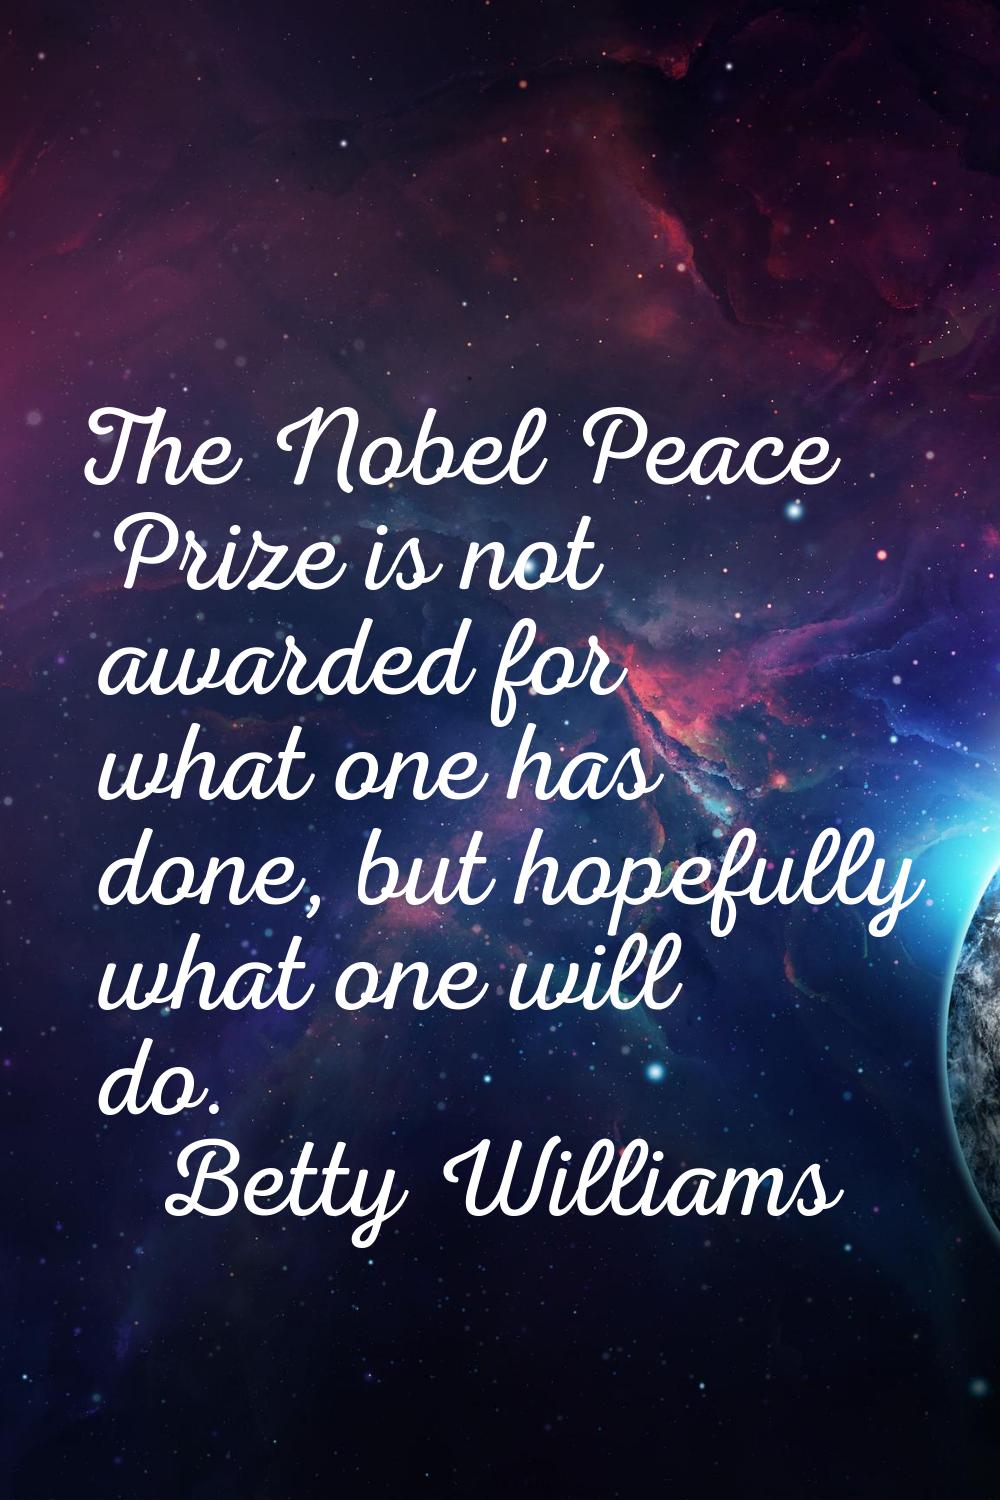 The Nobel Peace Prize is not awarded for what one has done, but hopefully what one will do.